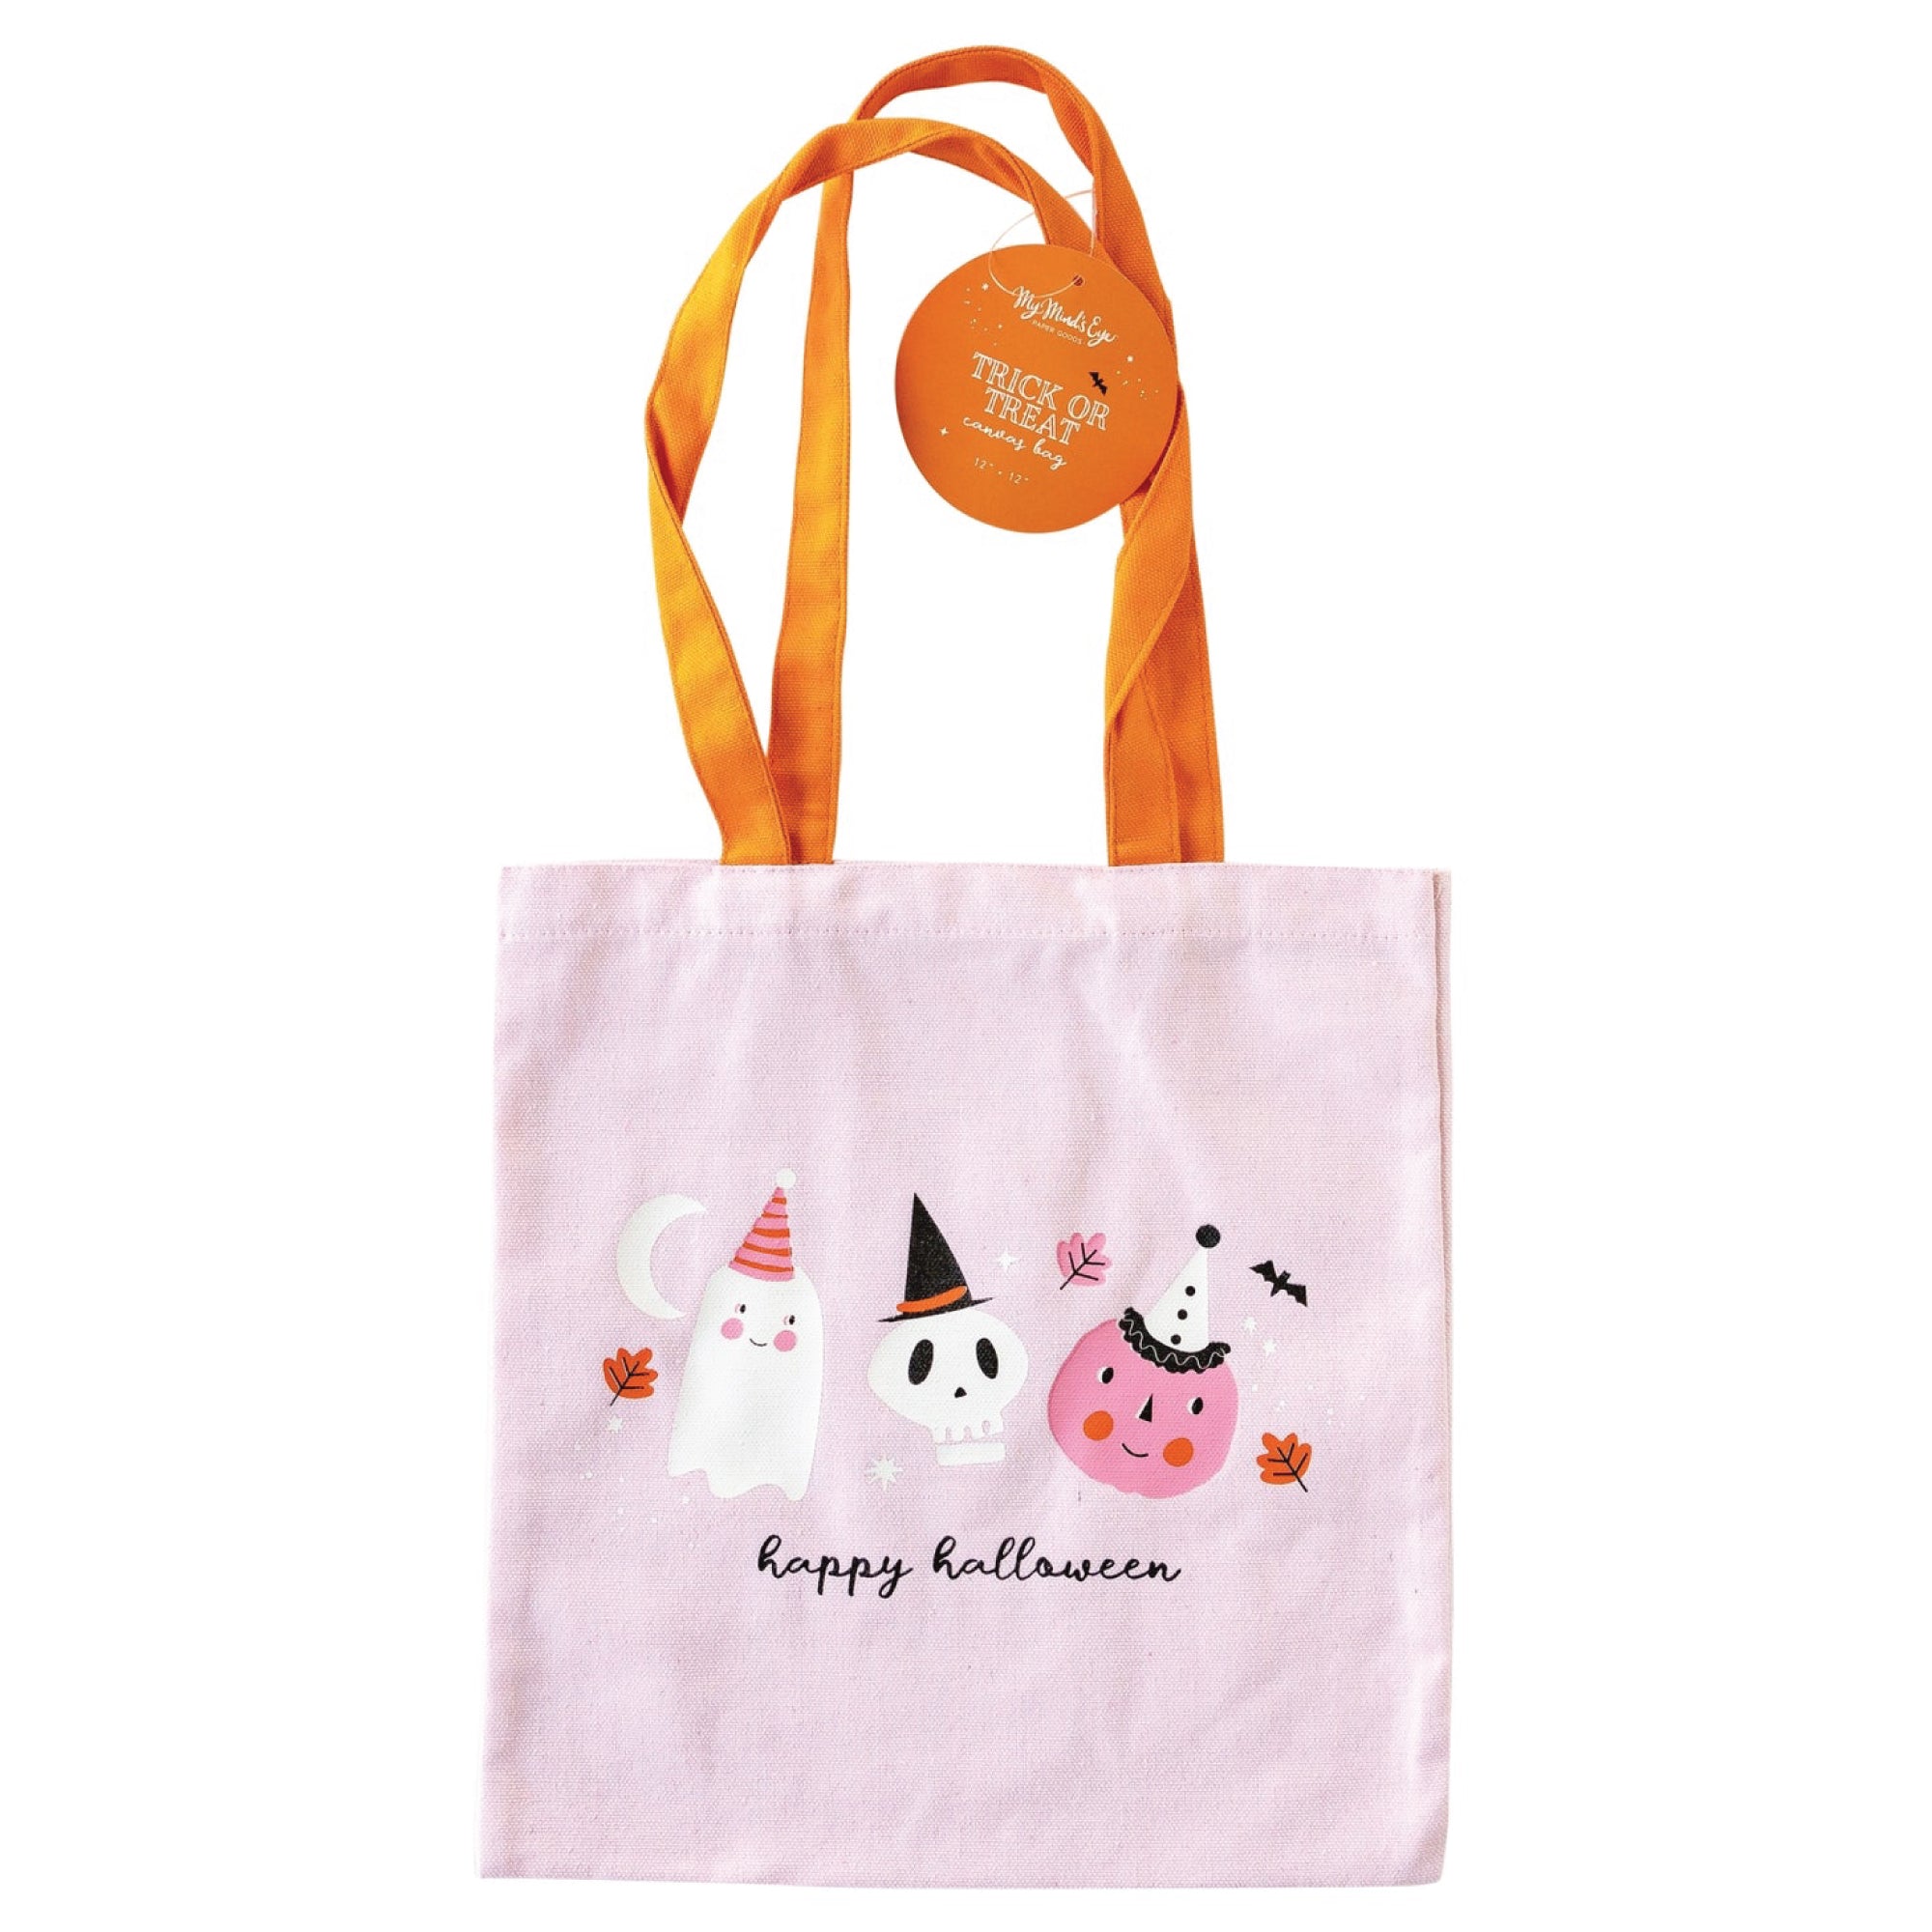 Halloween Party Favors & Gifts Bags